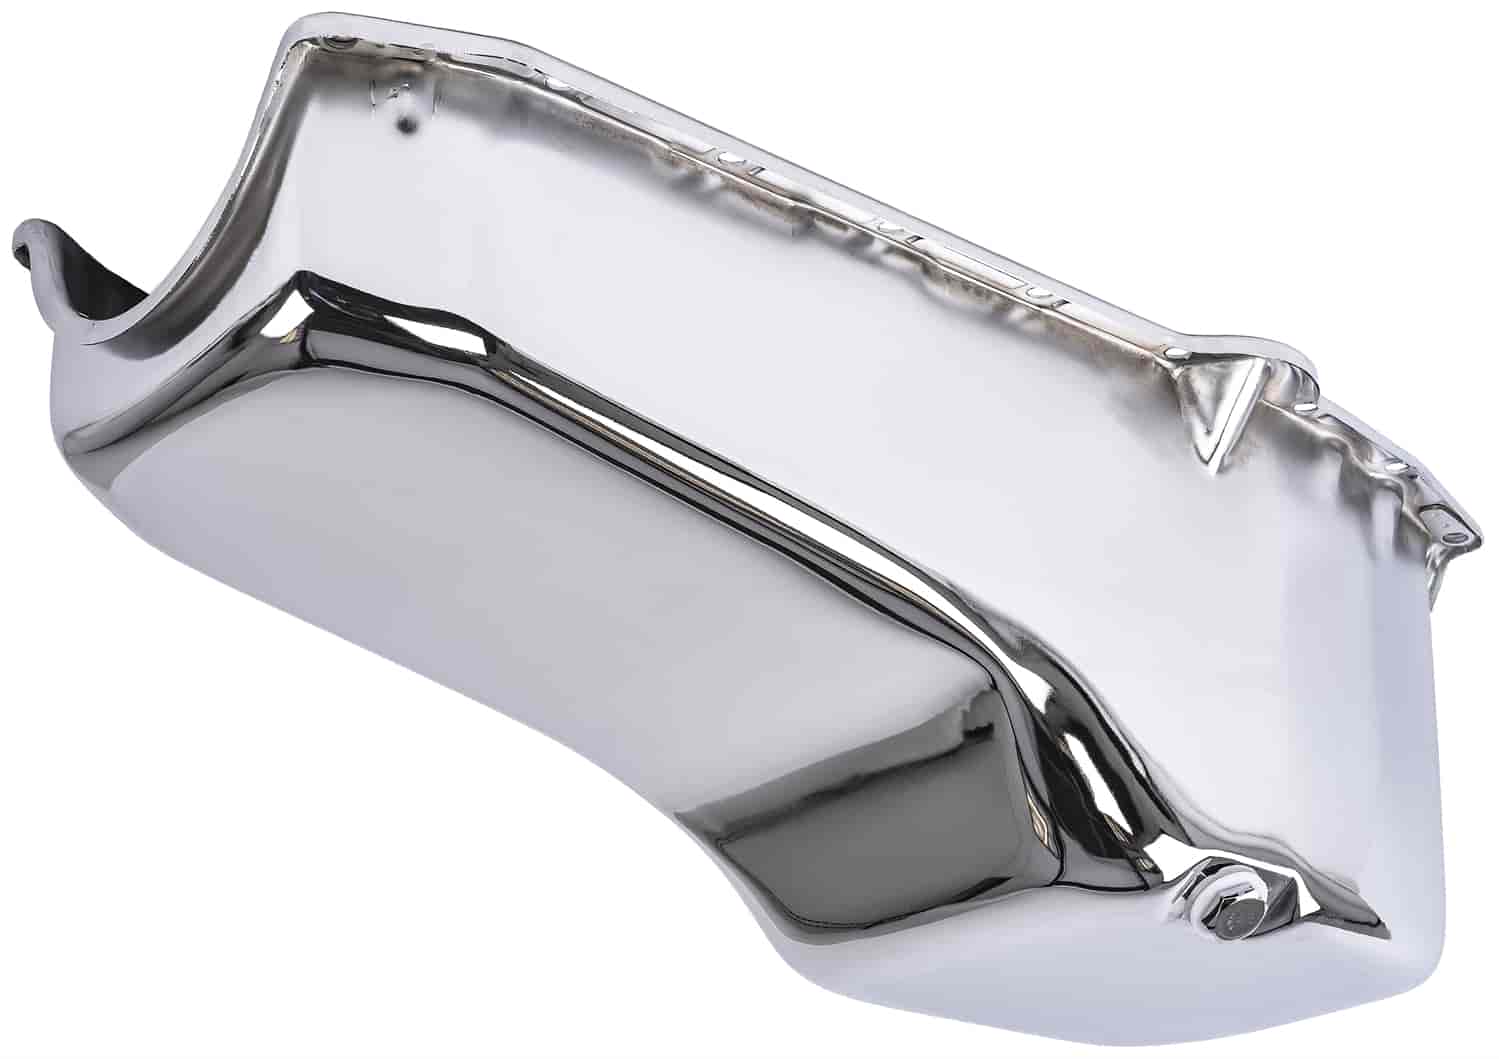 Stock-Style Replacement Oil Pan for 1955-1980 Small Block Chevy with Left/Driver Side Dip Stick [Chrome]